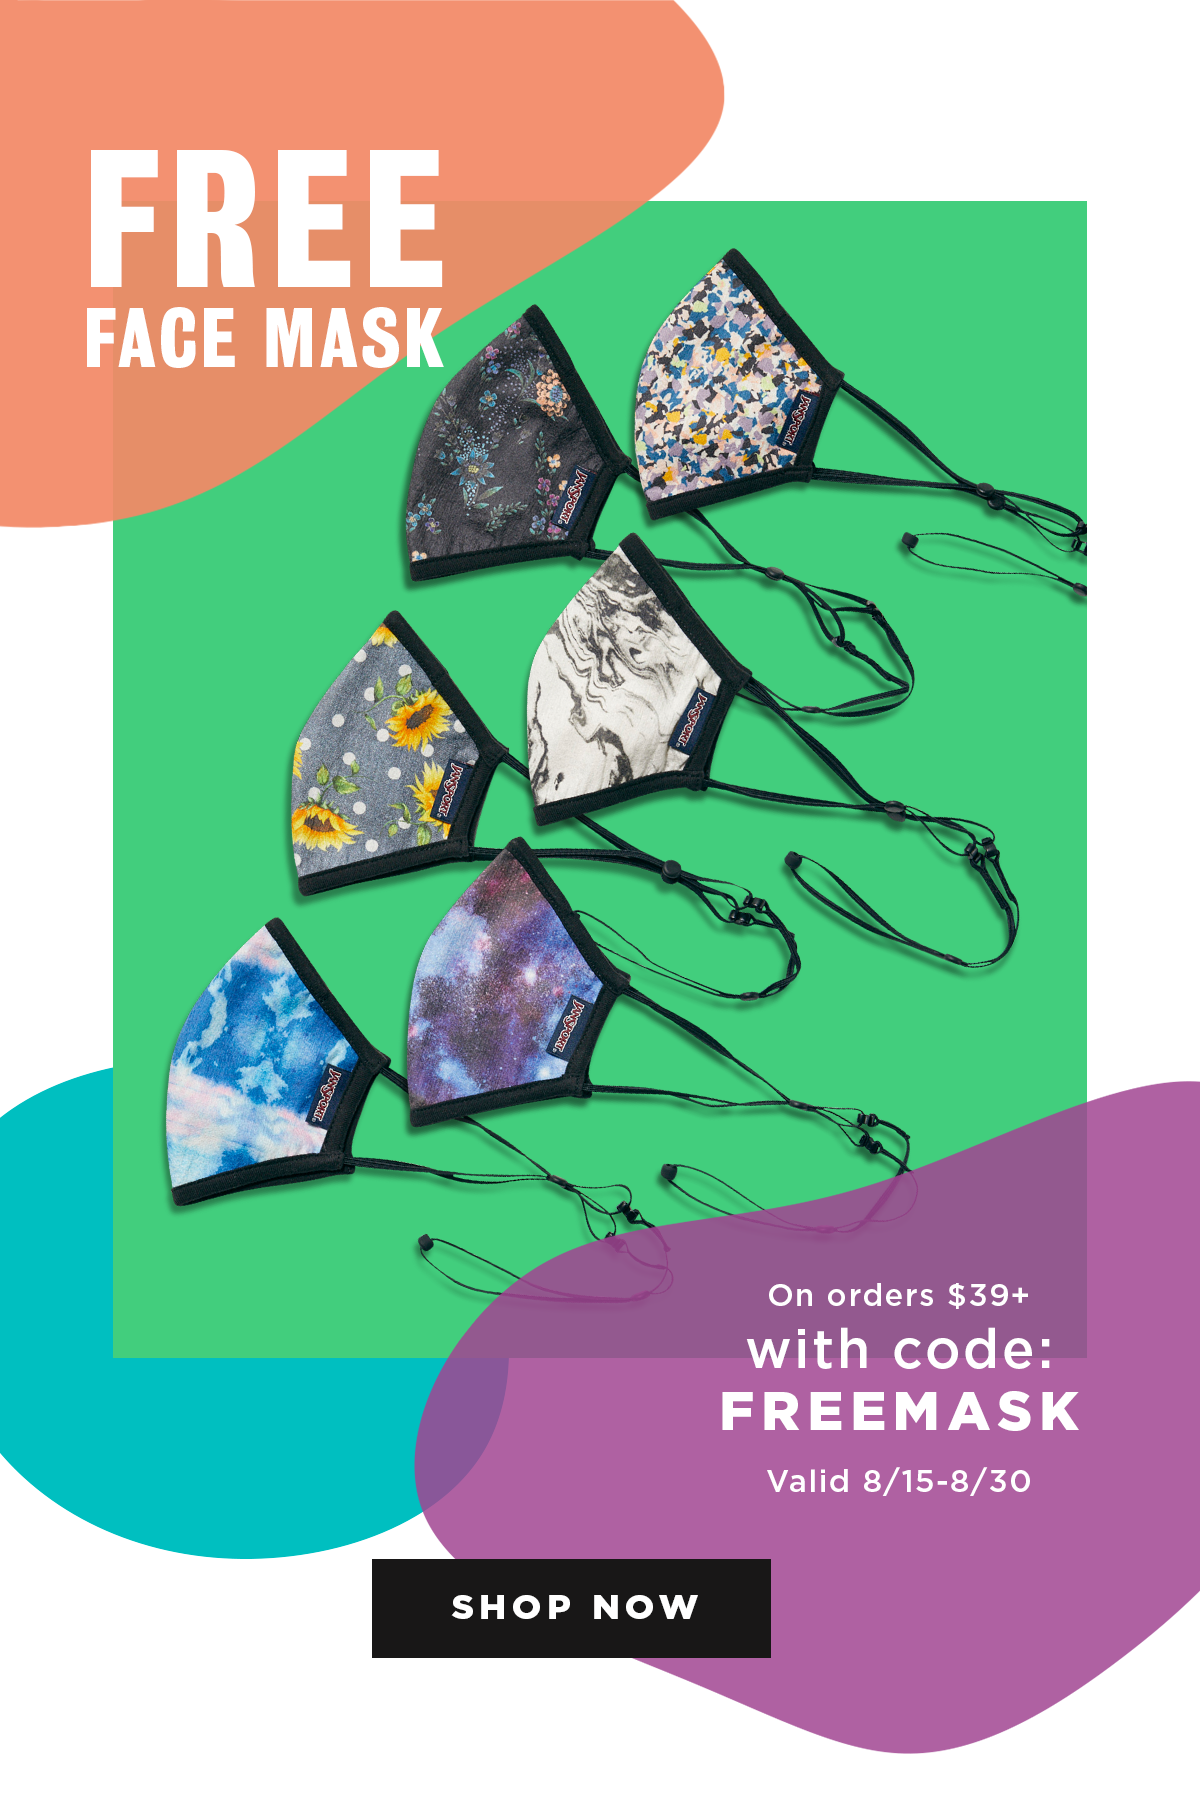 FREE FACE MASK On orders $39 with code: FREEMASK Valid 8/15-8/30 SHOP NOW